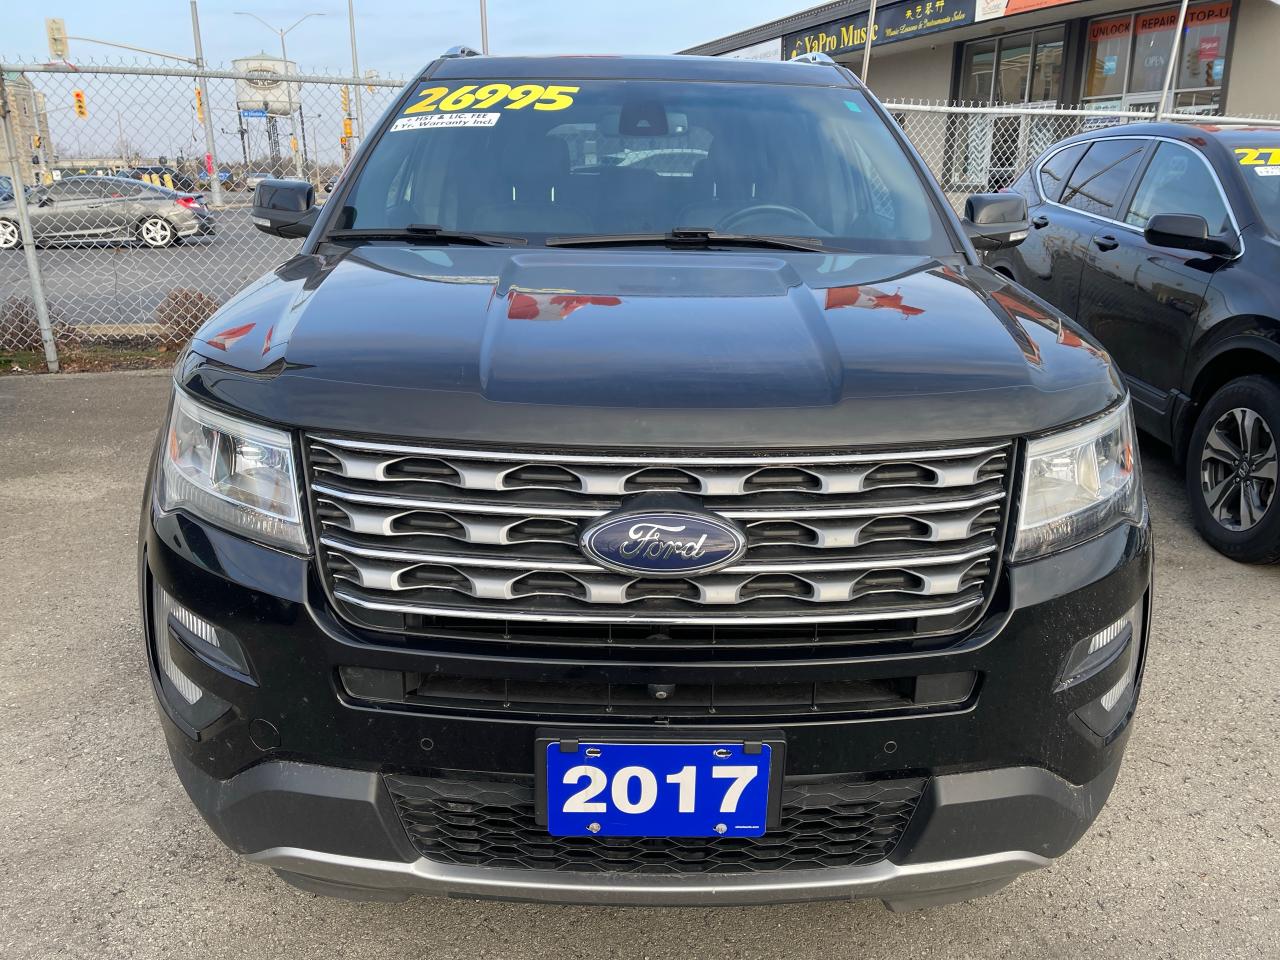 2017 Ford Explorer LIMITED, AWD, Leather, Navigation, Sunroof - Photo #2